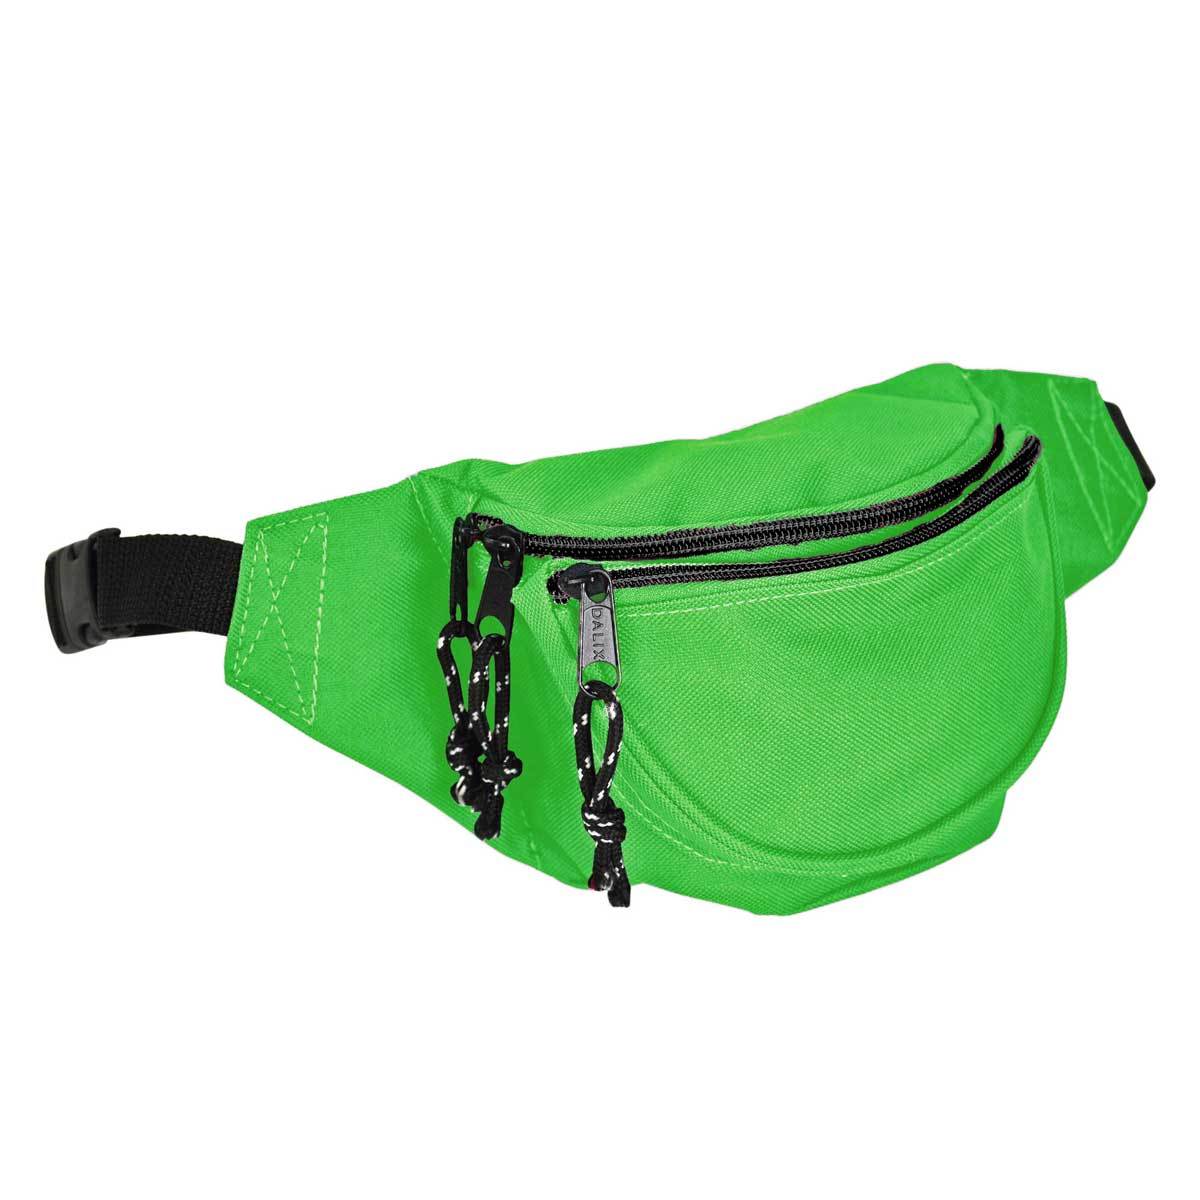 DALIX Fanny Pack w/ 3 Pockets Traveling Concealment Pouch Airport Money Bag FP-001 Fanny Packs DALIX Lime Green 